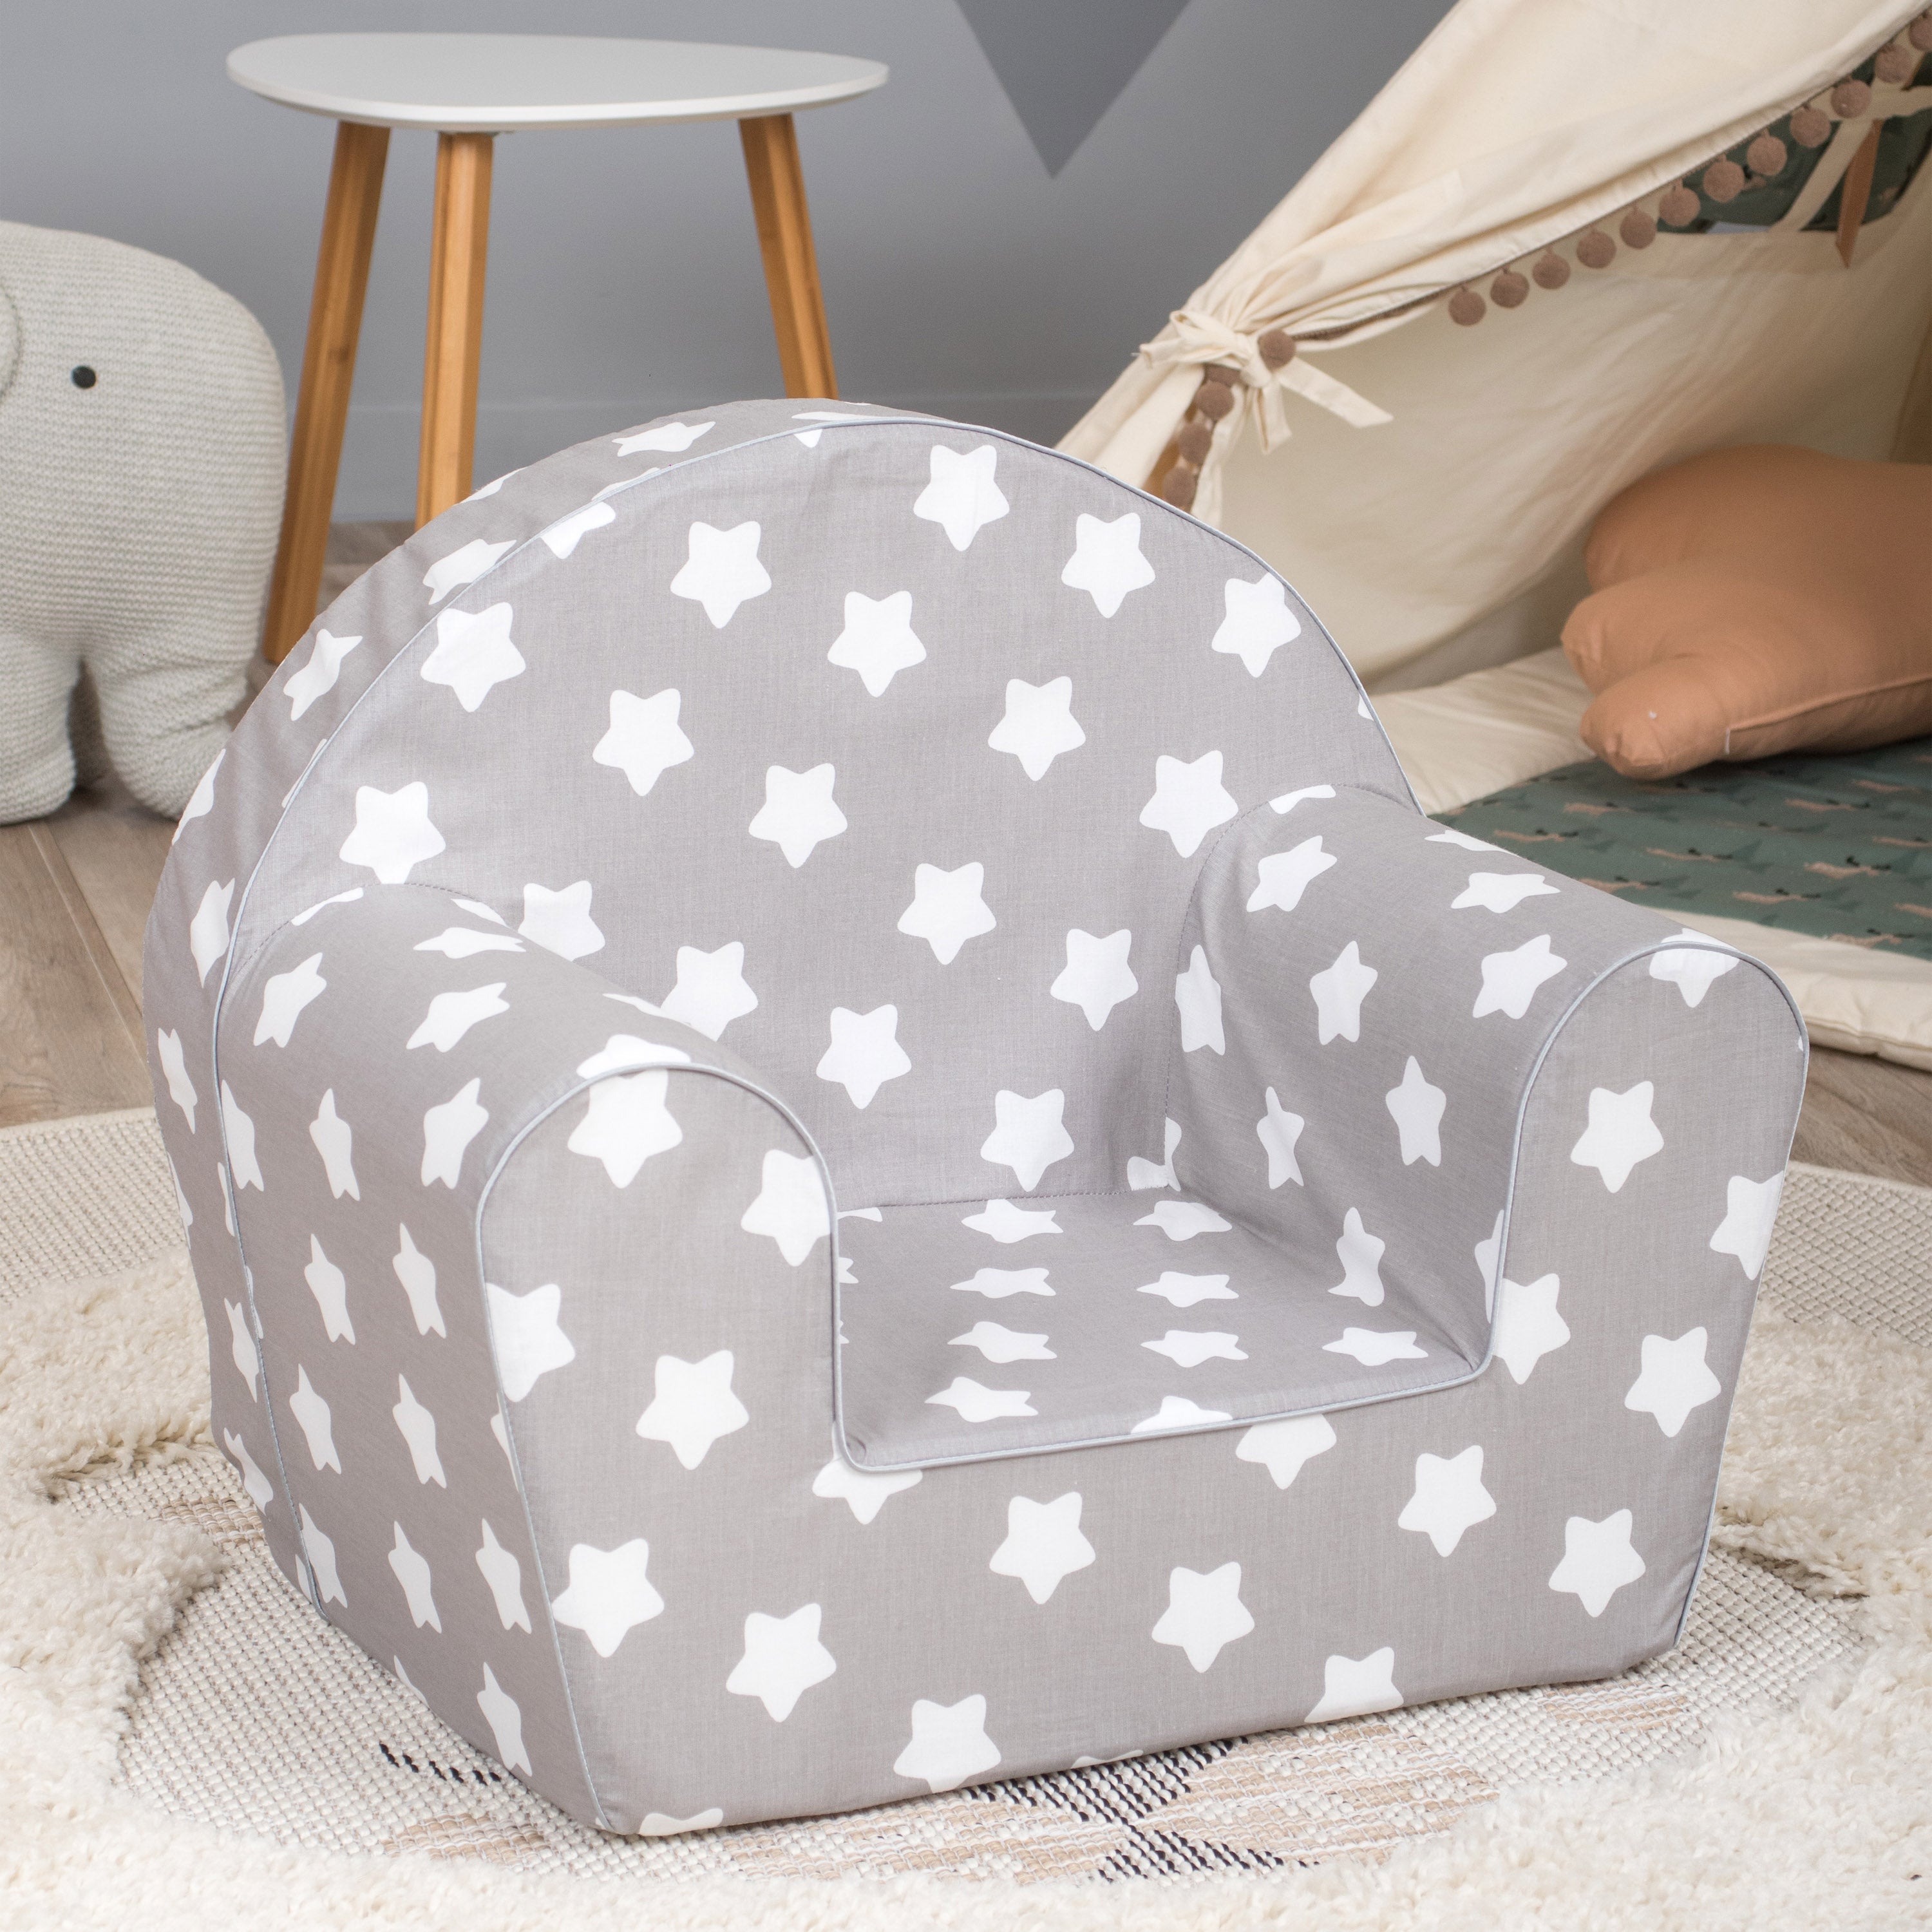 & Stars Armchair Family Chair | Kids DELSIT with - Toddler Delsit Gray